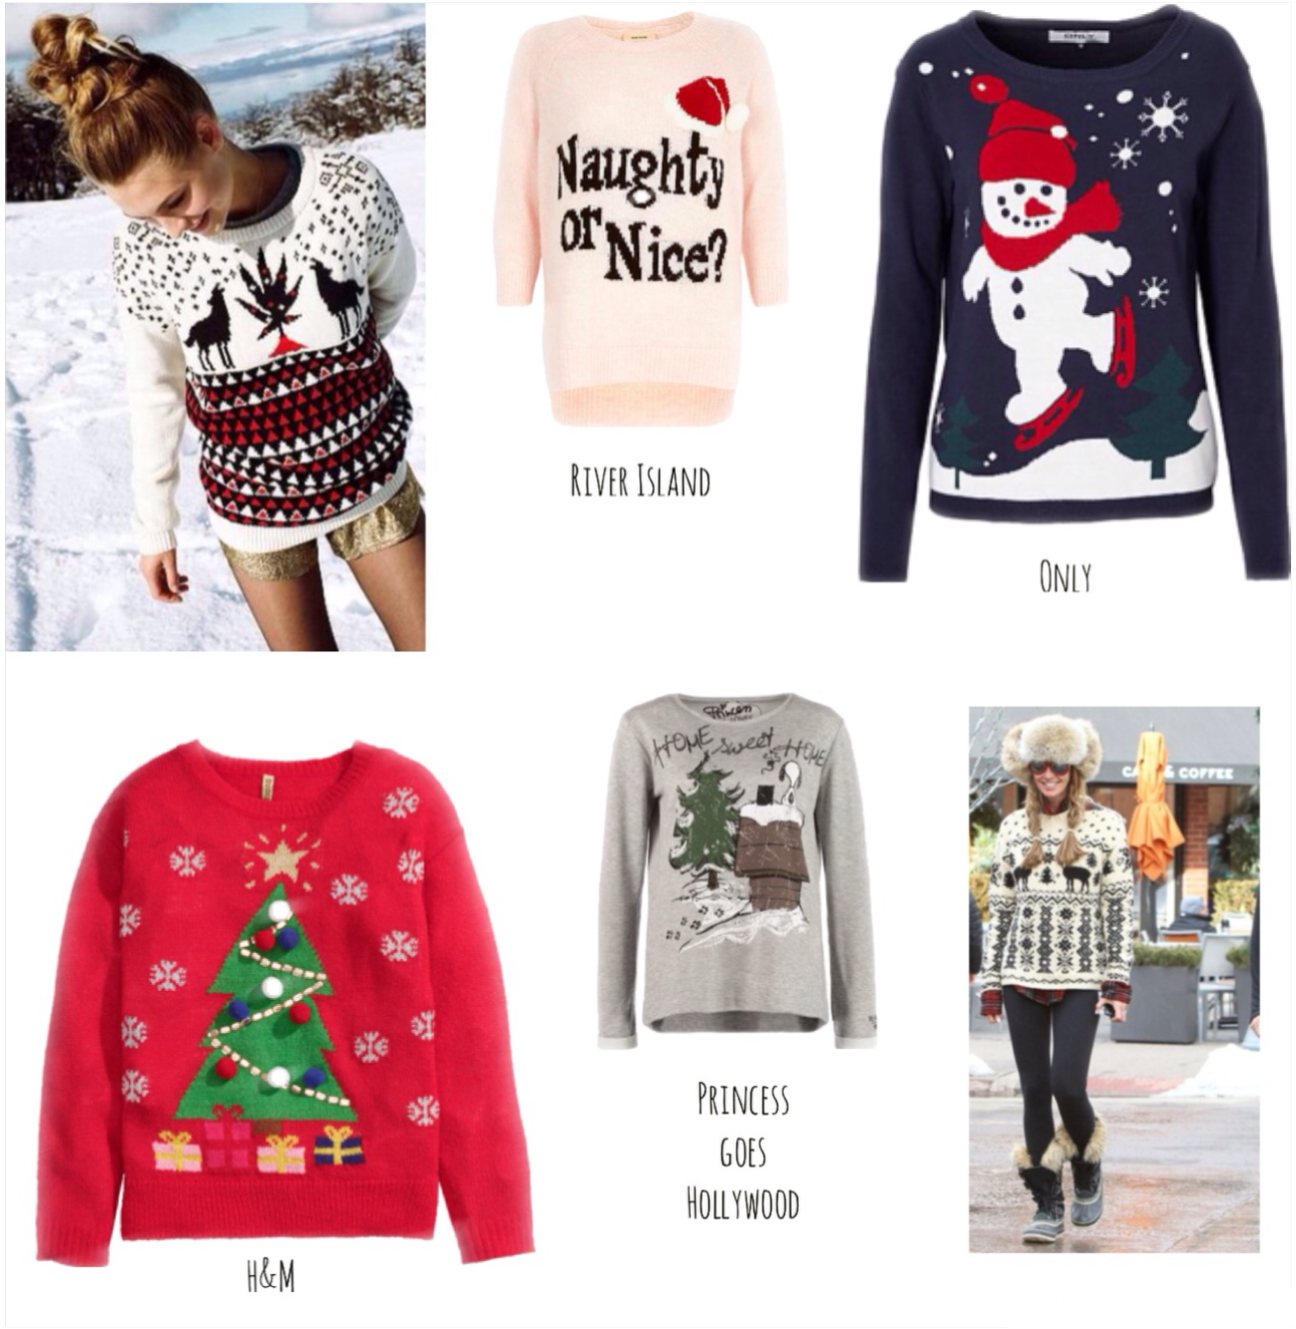 streetstyle Christmas sweaters online shopping blogforshops